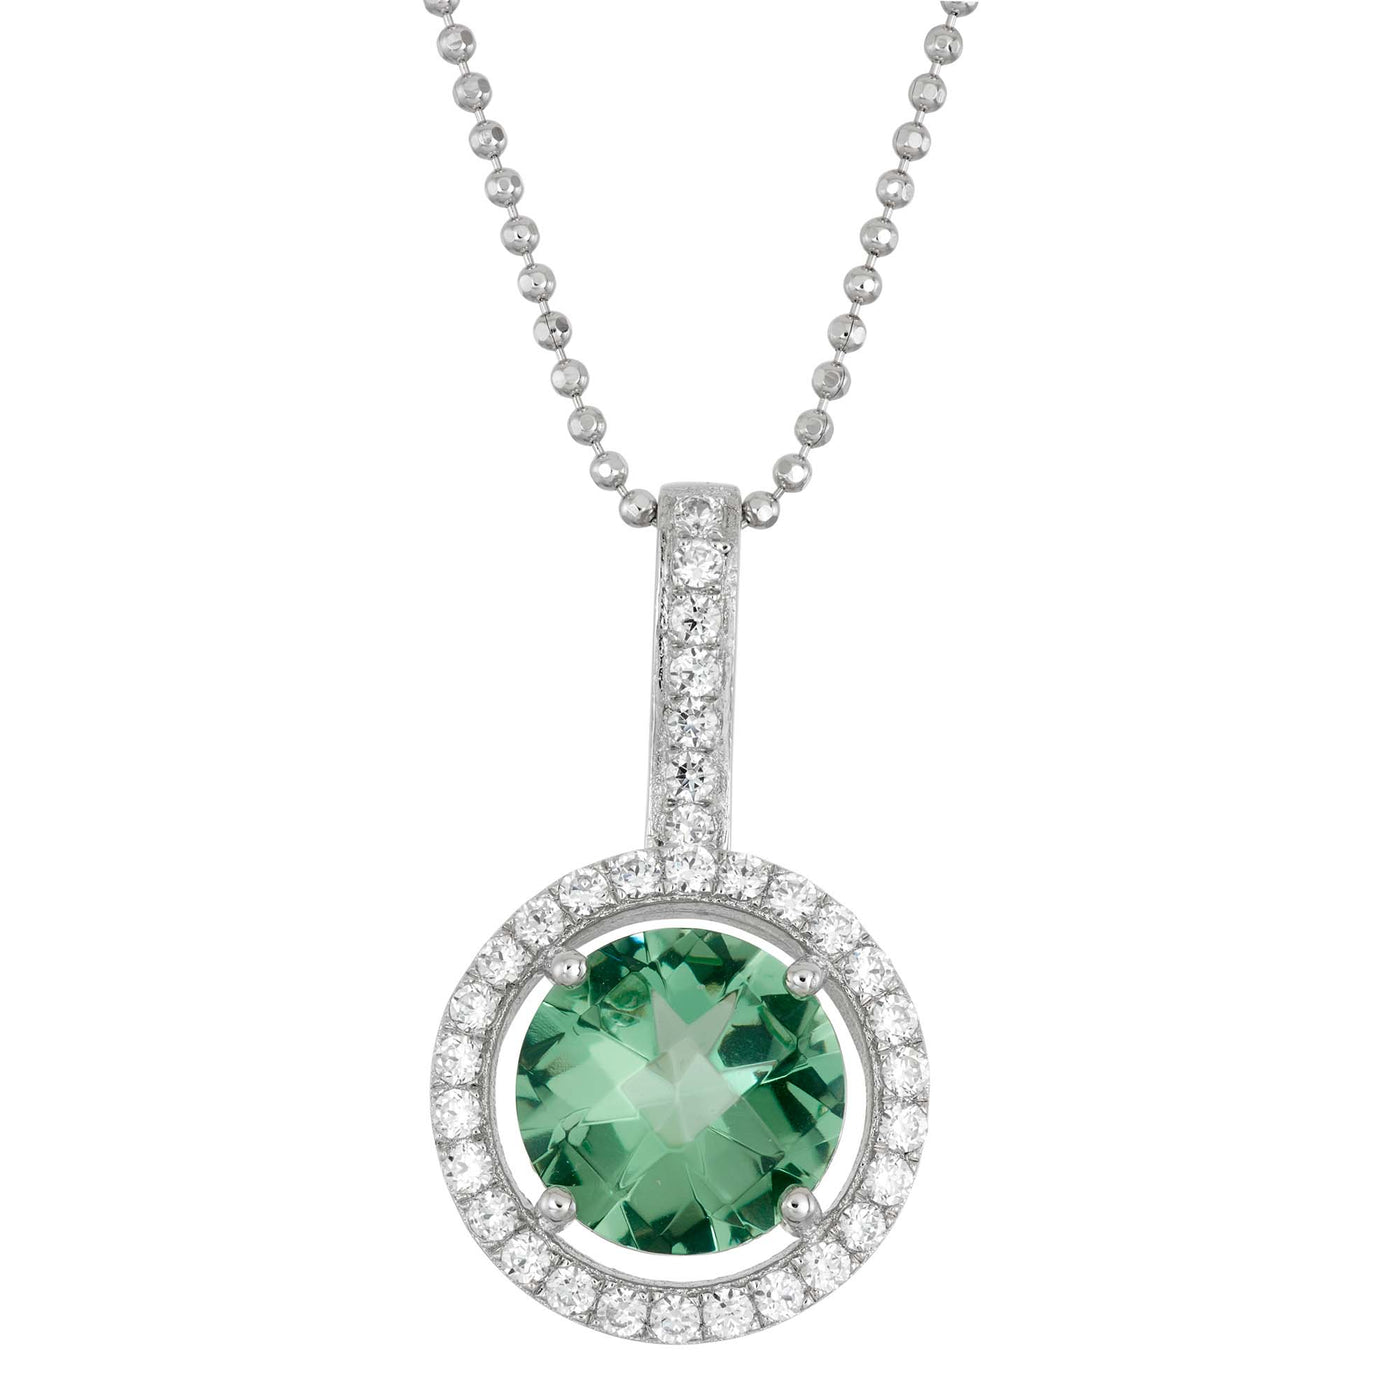 Rebecca Sloane Silver Drop Pendant with Green Obsidian and CZ